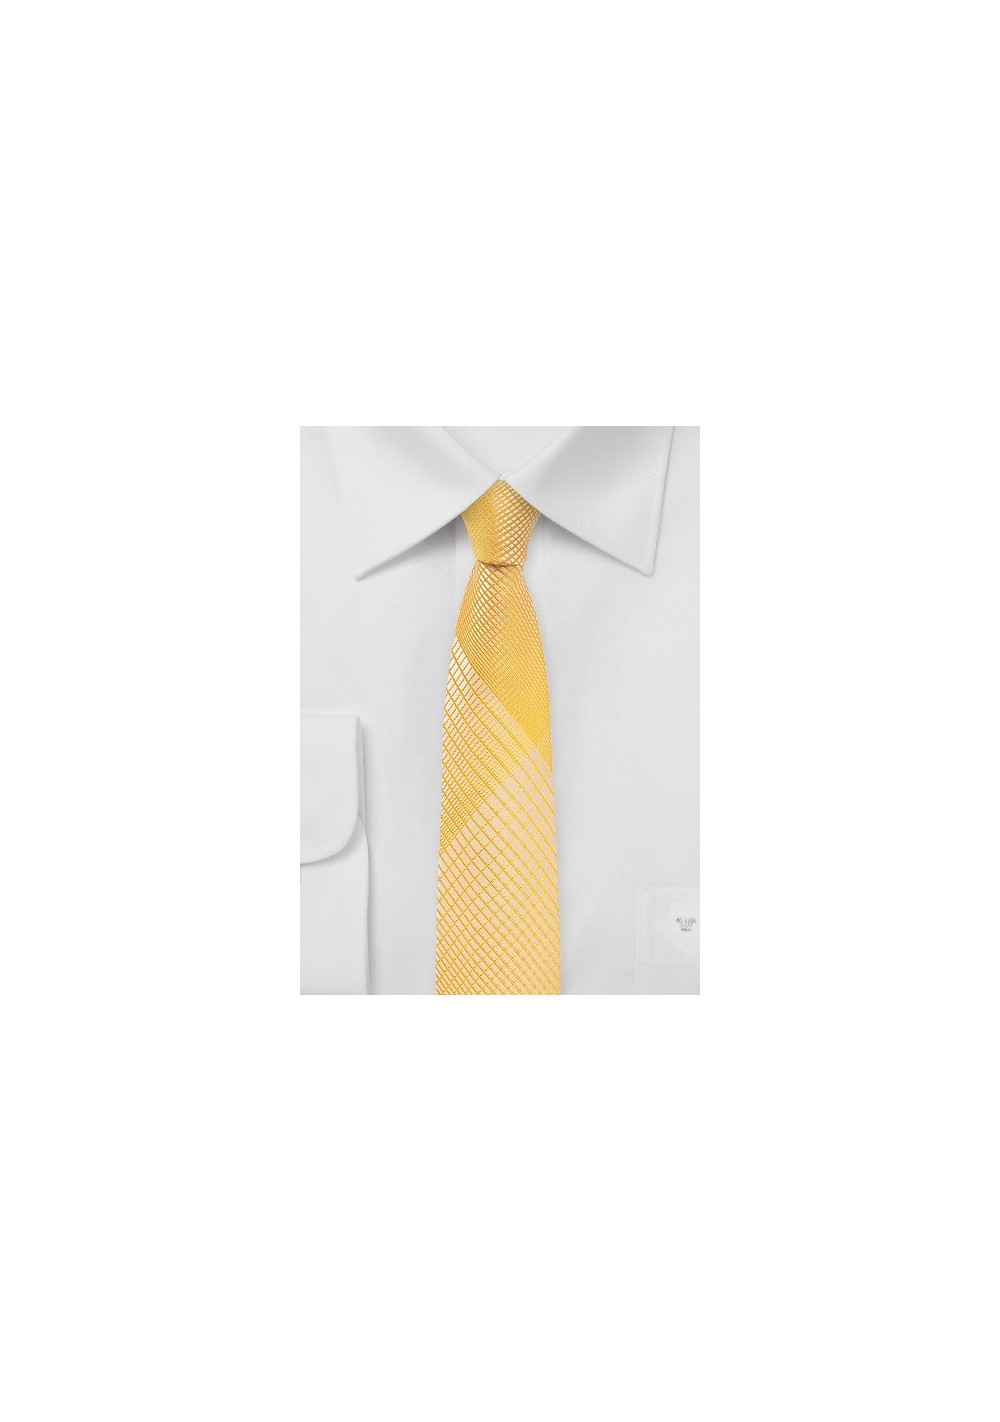 Mimosa Yellow Skinny Tie with Trendy Plaid